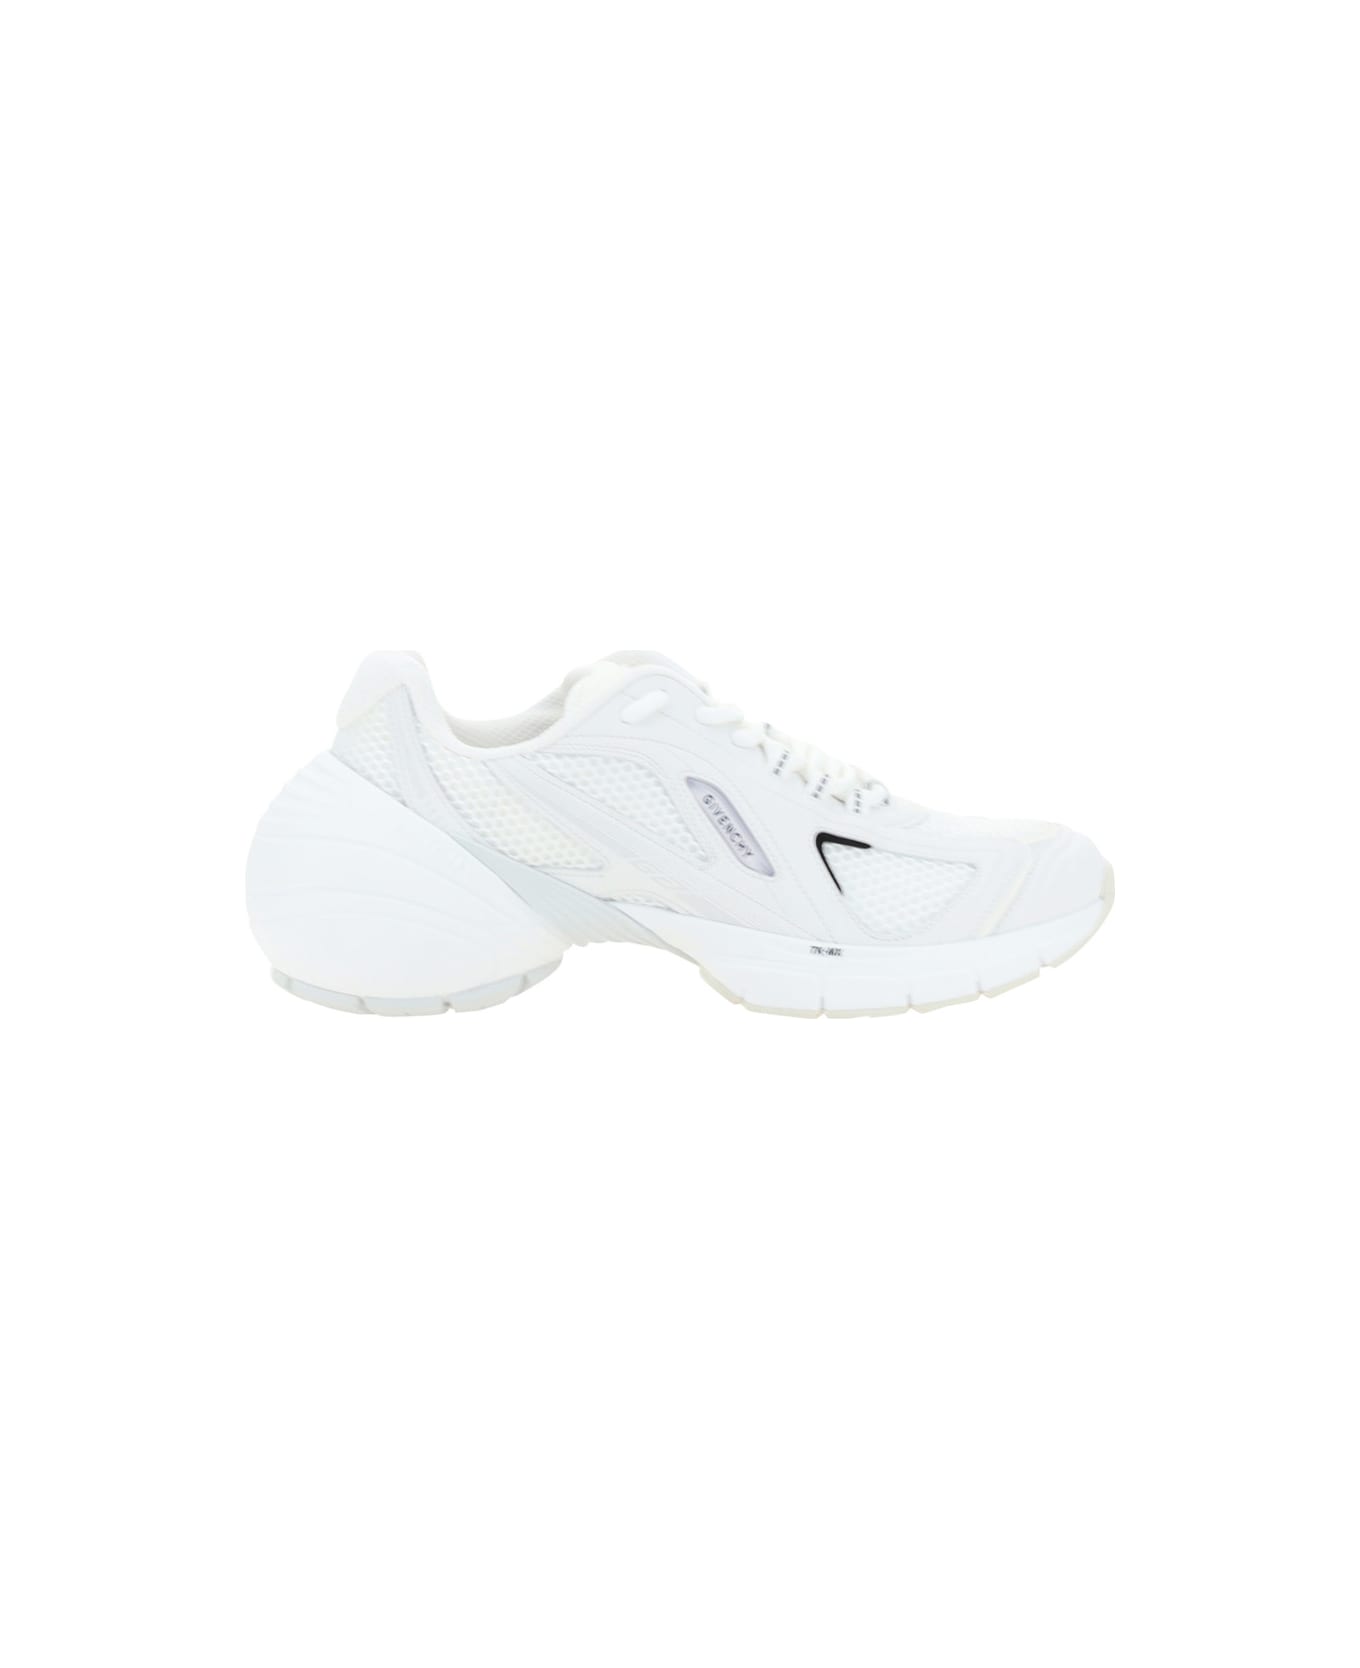 Givenchy Tk-mx Runner Sneakers